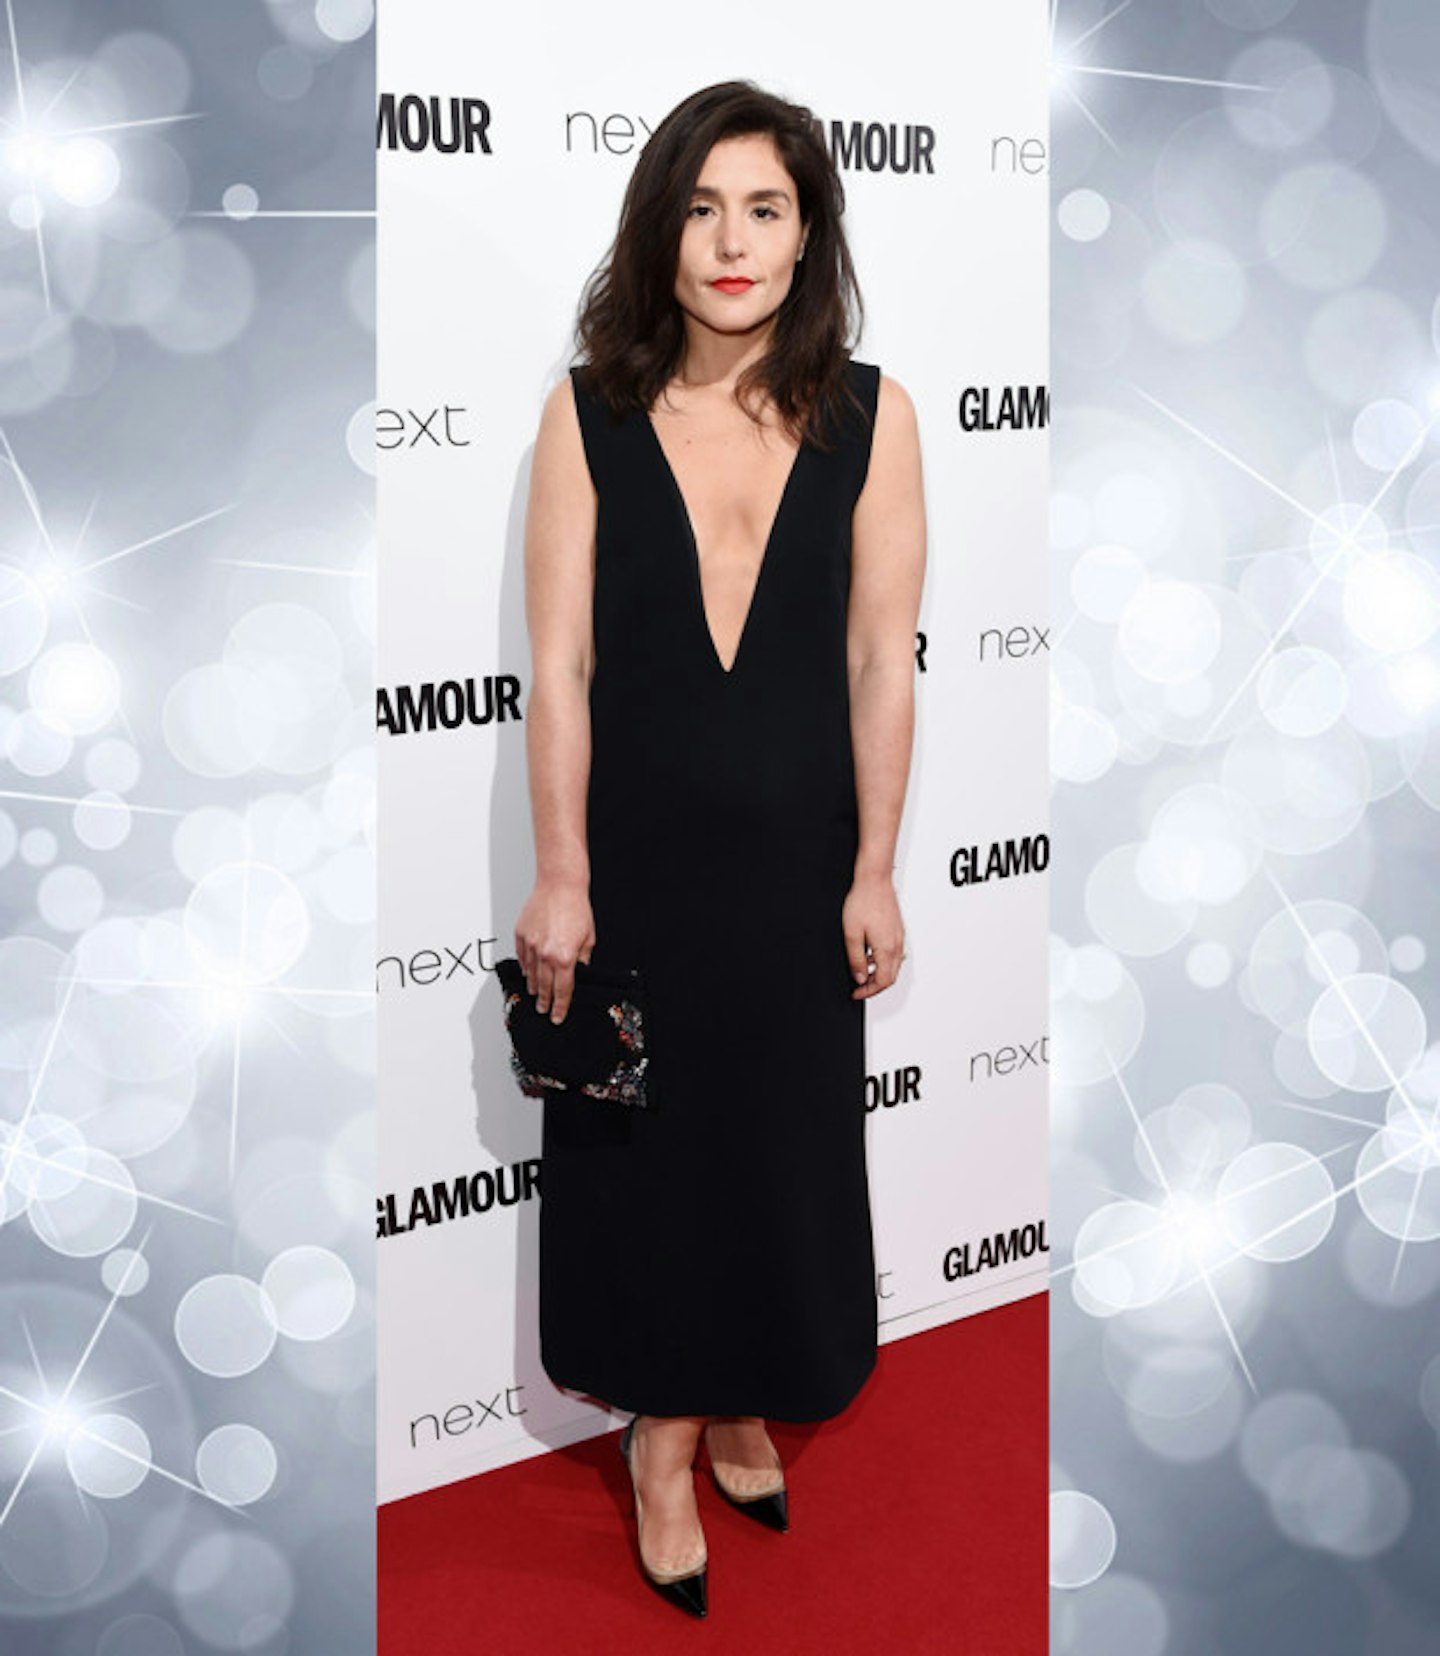 glamour-awards-outfits-jessie-ware-black-plunge-neck-dress